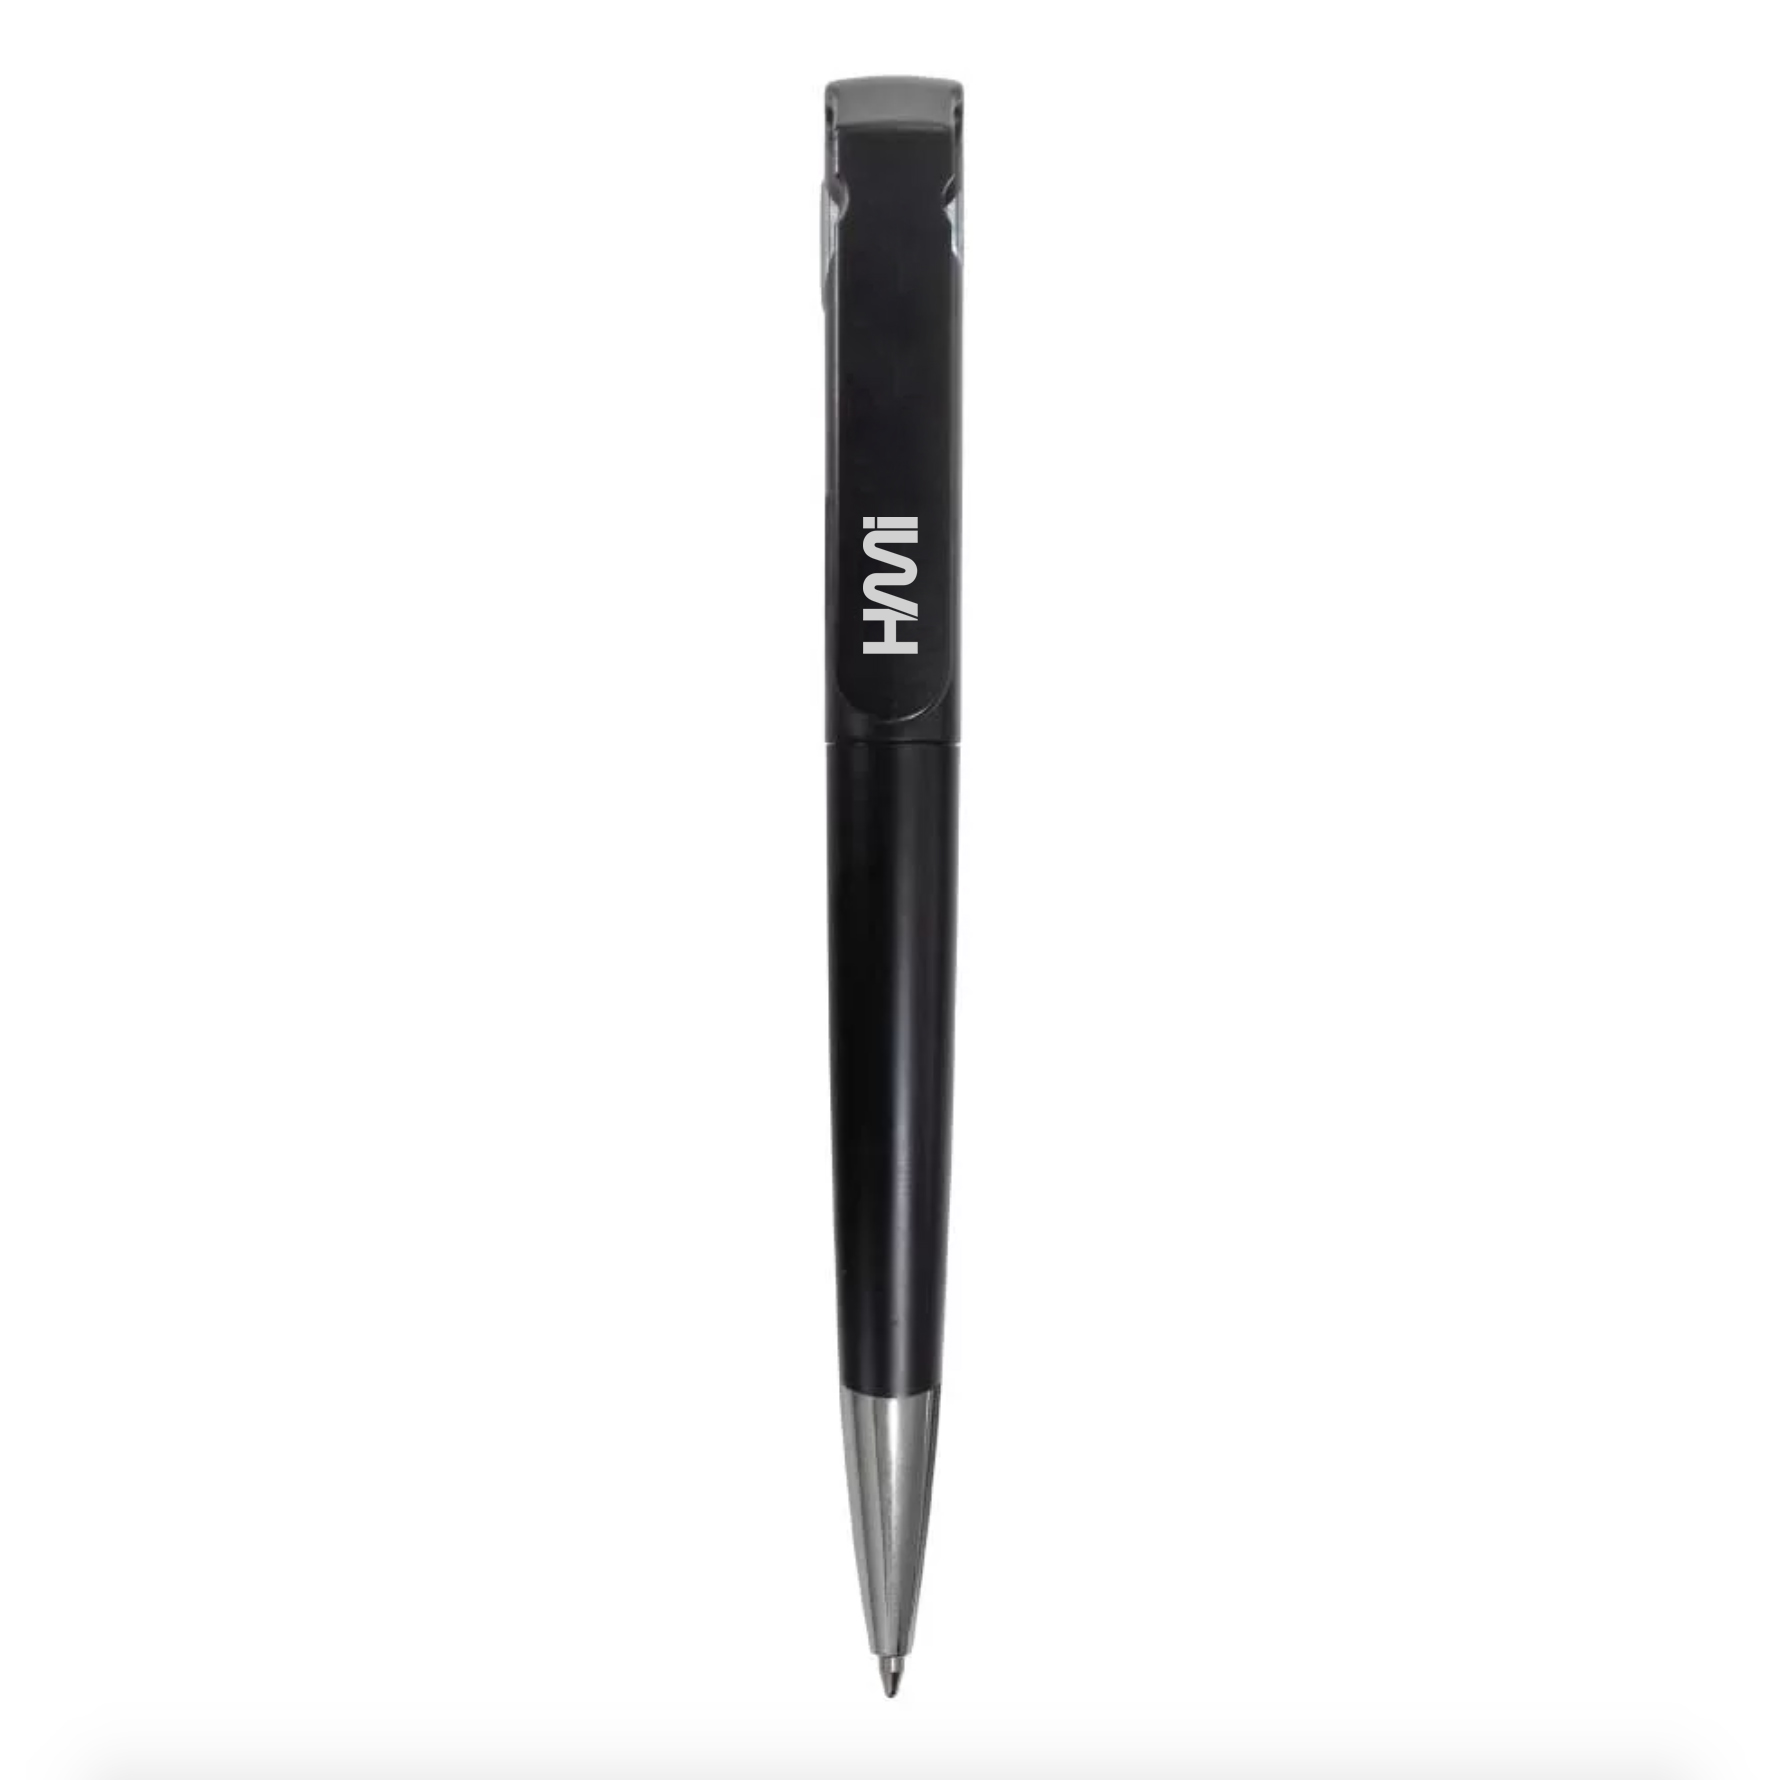 Plastic Pen printed with logo | Promotional plastic pen branded with logo in Germany | Print logo on Promotional pen in Germany | HMi GmbH